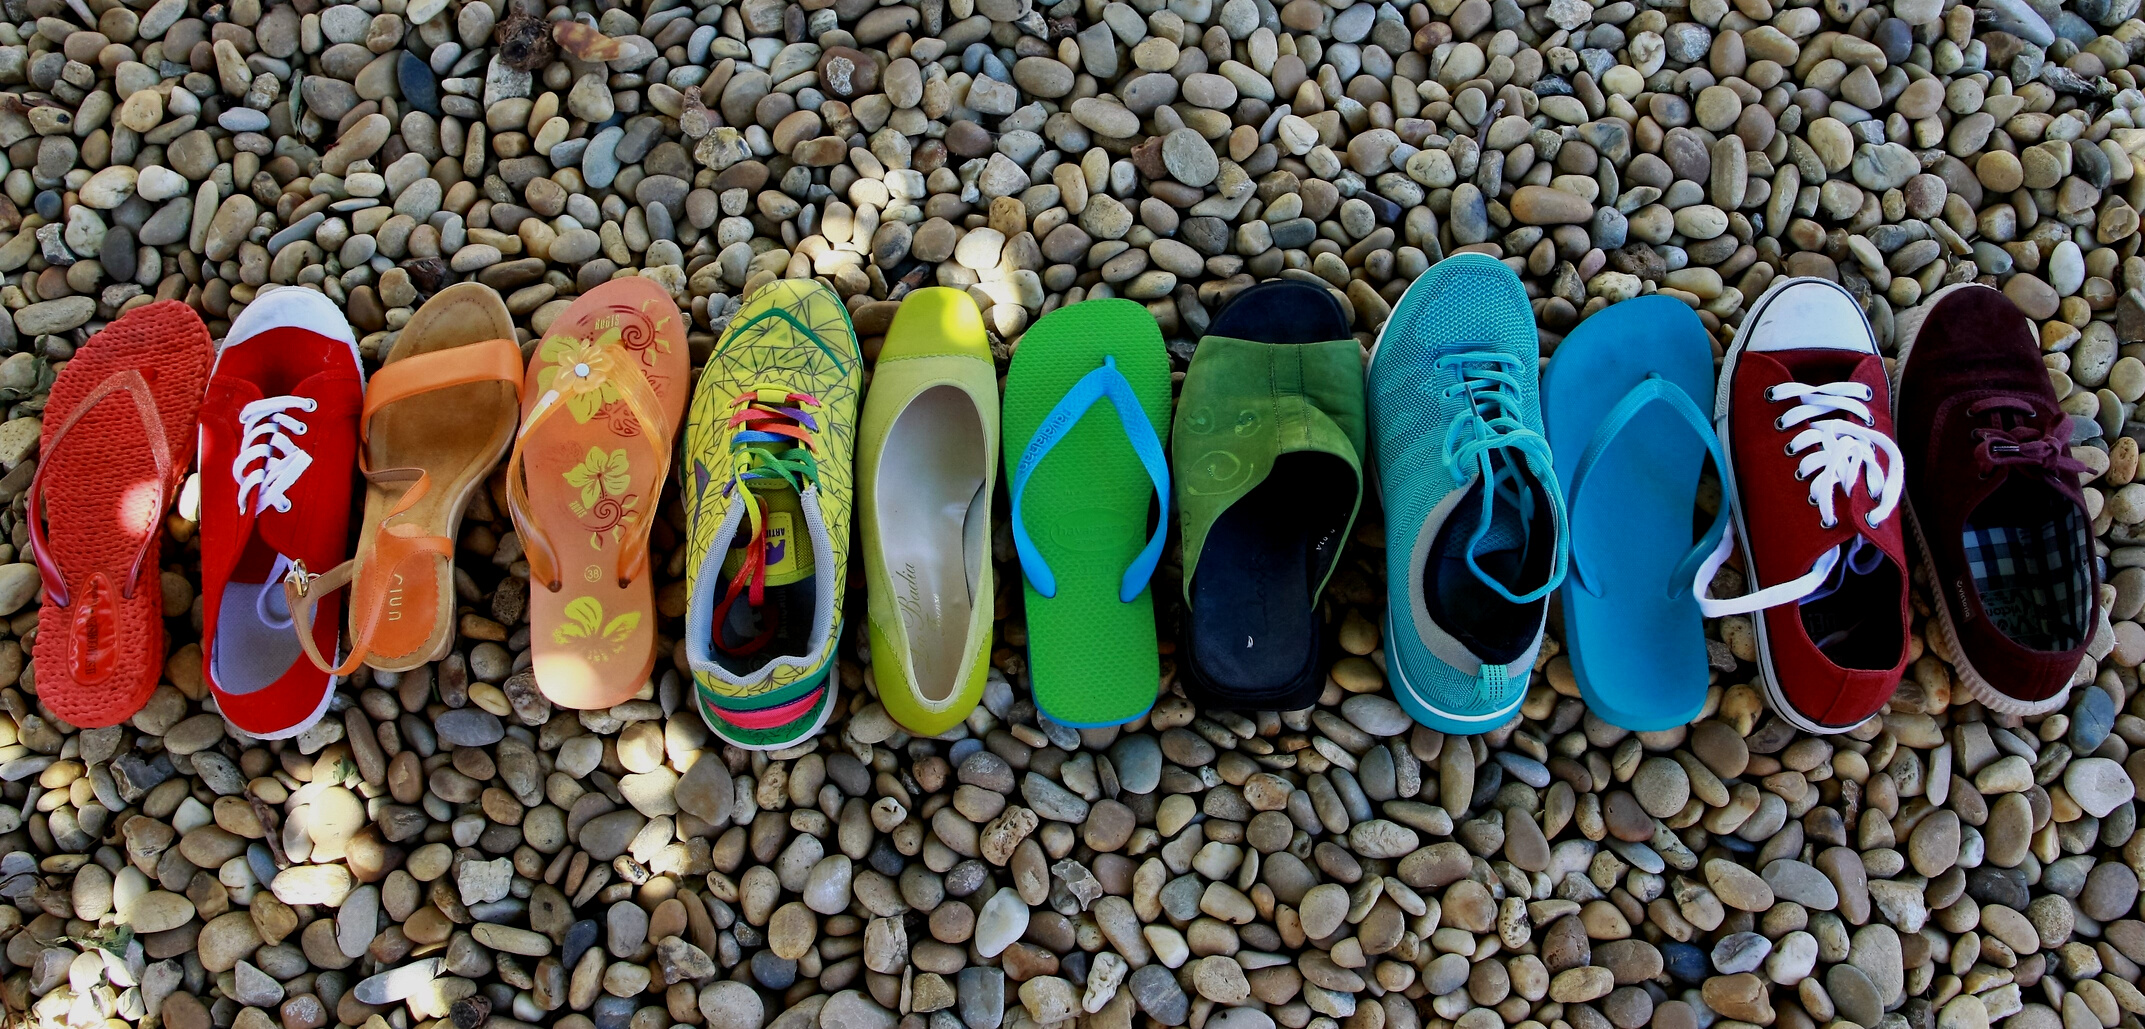 Colorful Shoes and Slippers Arranged on Pebbles